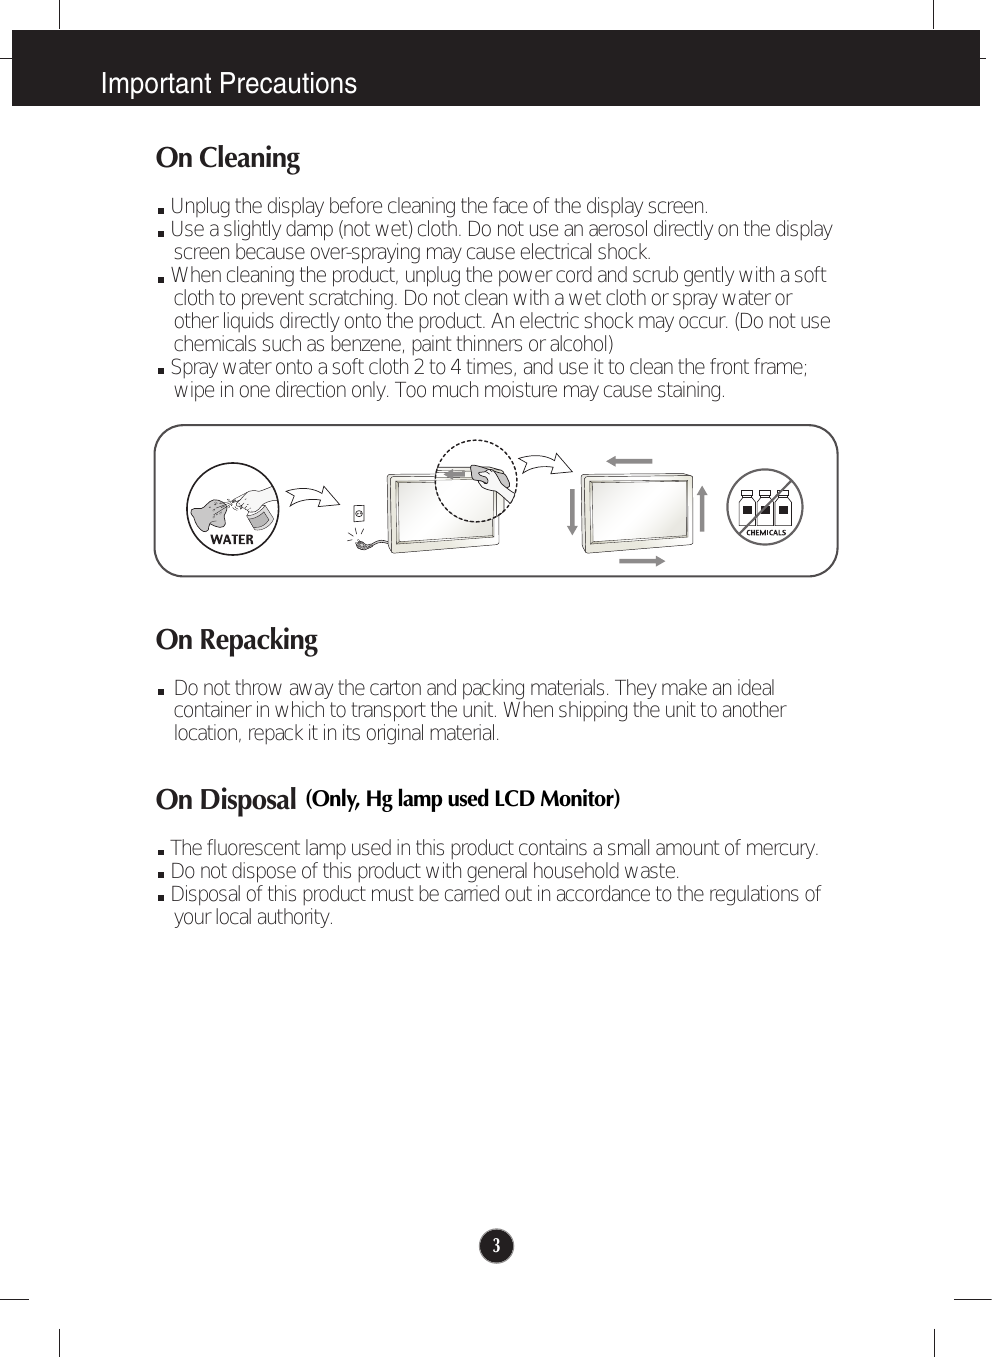 Important Precautions3On CleaningUnplug the display before cleaning the face of the display screen.Use a slightly damp (not wet) cloth. Do not use an aerosol directly on the displayscreen because over-spraying may cause electrical shock.When cleaning the product, unplug the power cord and scrub gently with a softcloth to prevent scratching. Do not clean with a wet cloth or spray water orother liquids directly onto the product. An electric shock may occur. (Do not usechemicals such as benzene, paint thinners or alcohol) Spray water onto a soft cloth 2 to 4 times, and use it to clean the front frame;wipe in one direction only. Too much moisture may cause staining.  On RepackingDo not throw away the carton and packing materials. They make an idealcontainer in which to transport the unit. When shipping the unit to anotherlocation, repack it in its original material.On DisposalThe fluorescent lamp used in this product contains a small amount of mercury.Do not dispose of this product with general household waste.Disposal of this product must be carried out in accordance to the regulations ofyour local authority.(Only, Hg lamp used LCD Monitor)